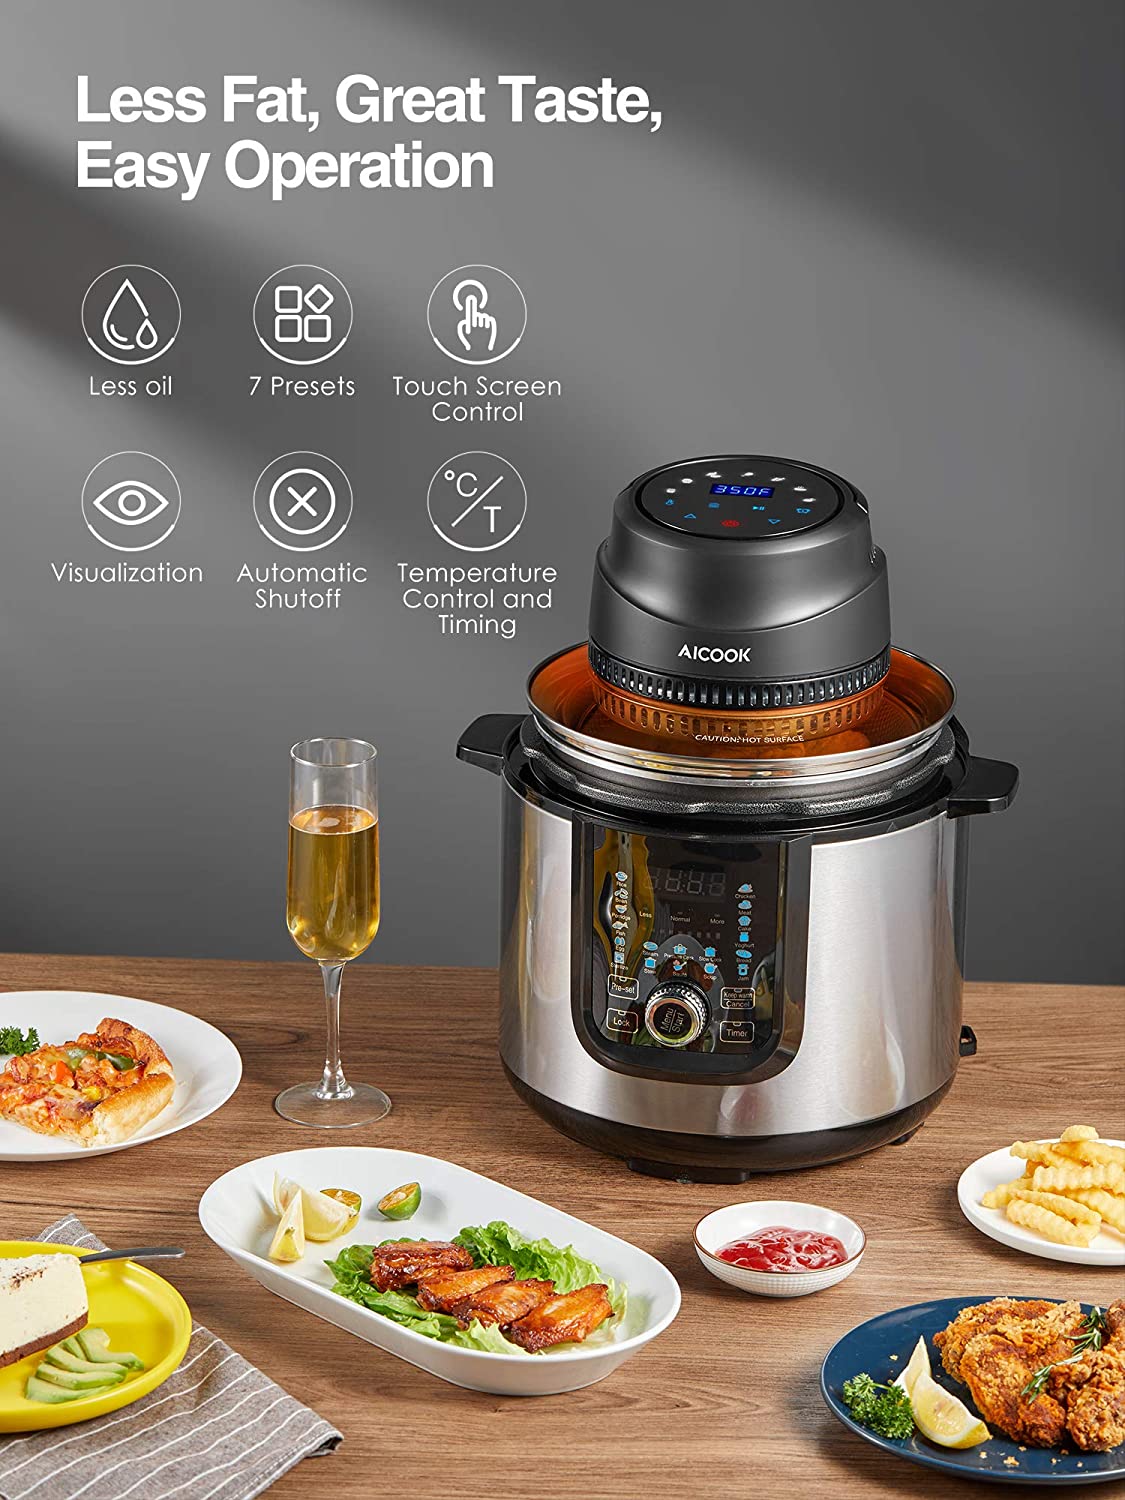 AICOOK | Instant Pot Air Fryer Lid, 7 in 1 Turn Pressure Cooker Into Air Fryer, LED Touchscreen, Accessories and Recipe Included, Less Fat, Great Taste, Easy Operation